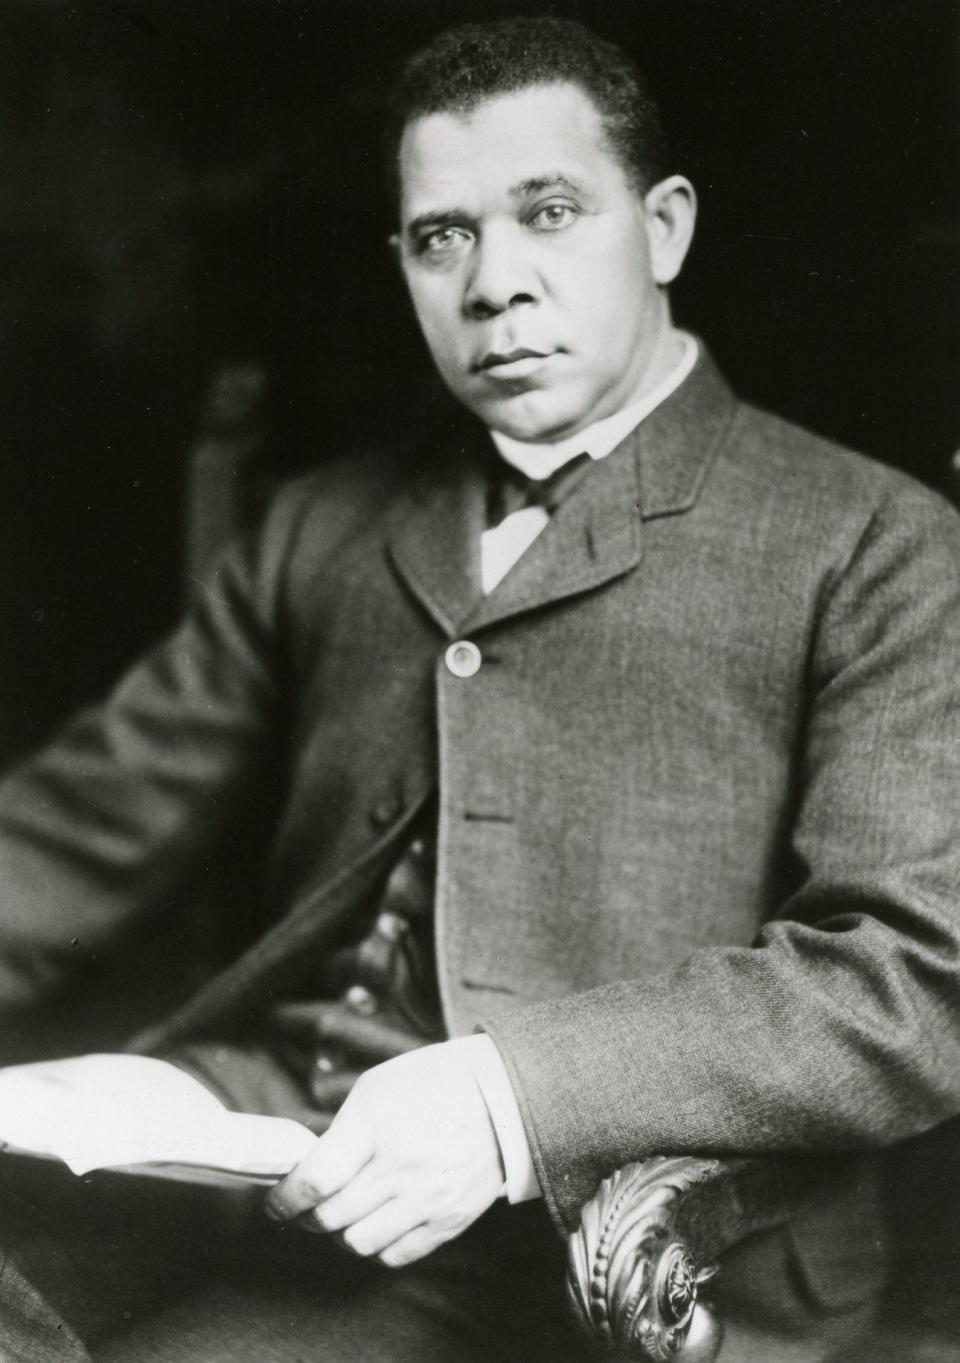 Educator, orator and author Booker T. Washington in September 1909.